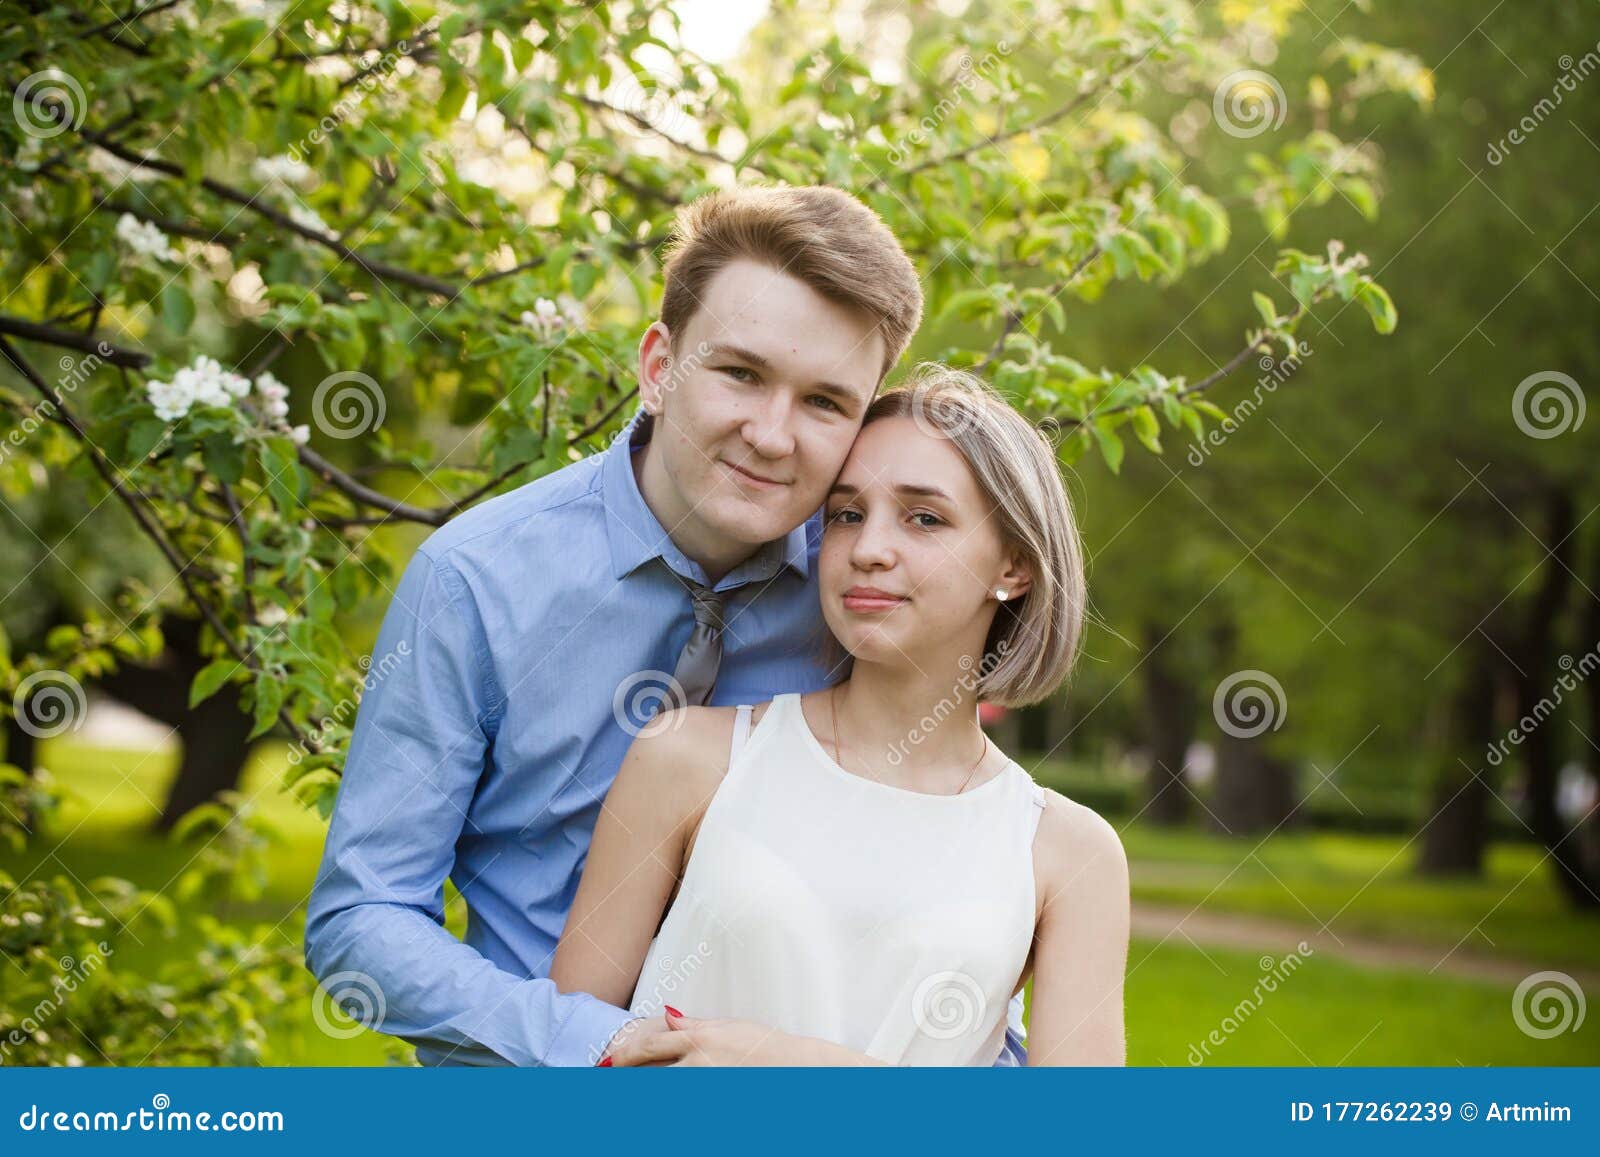 Pretty Young Couple Together Outdoors Boy And Girl Portrait S